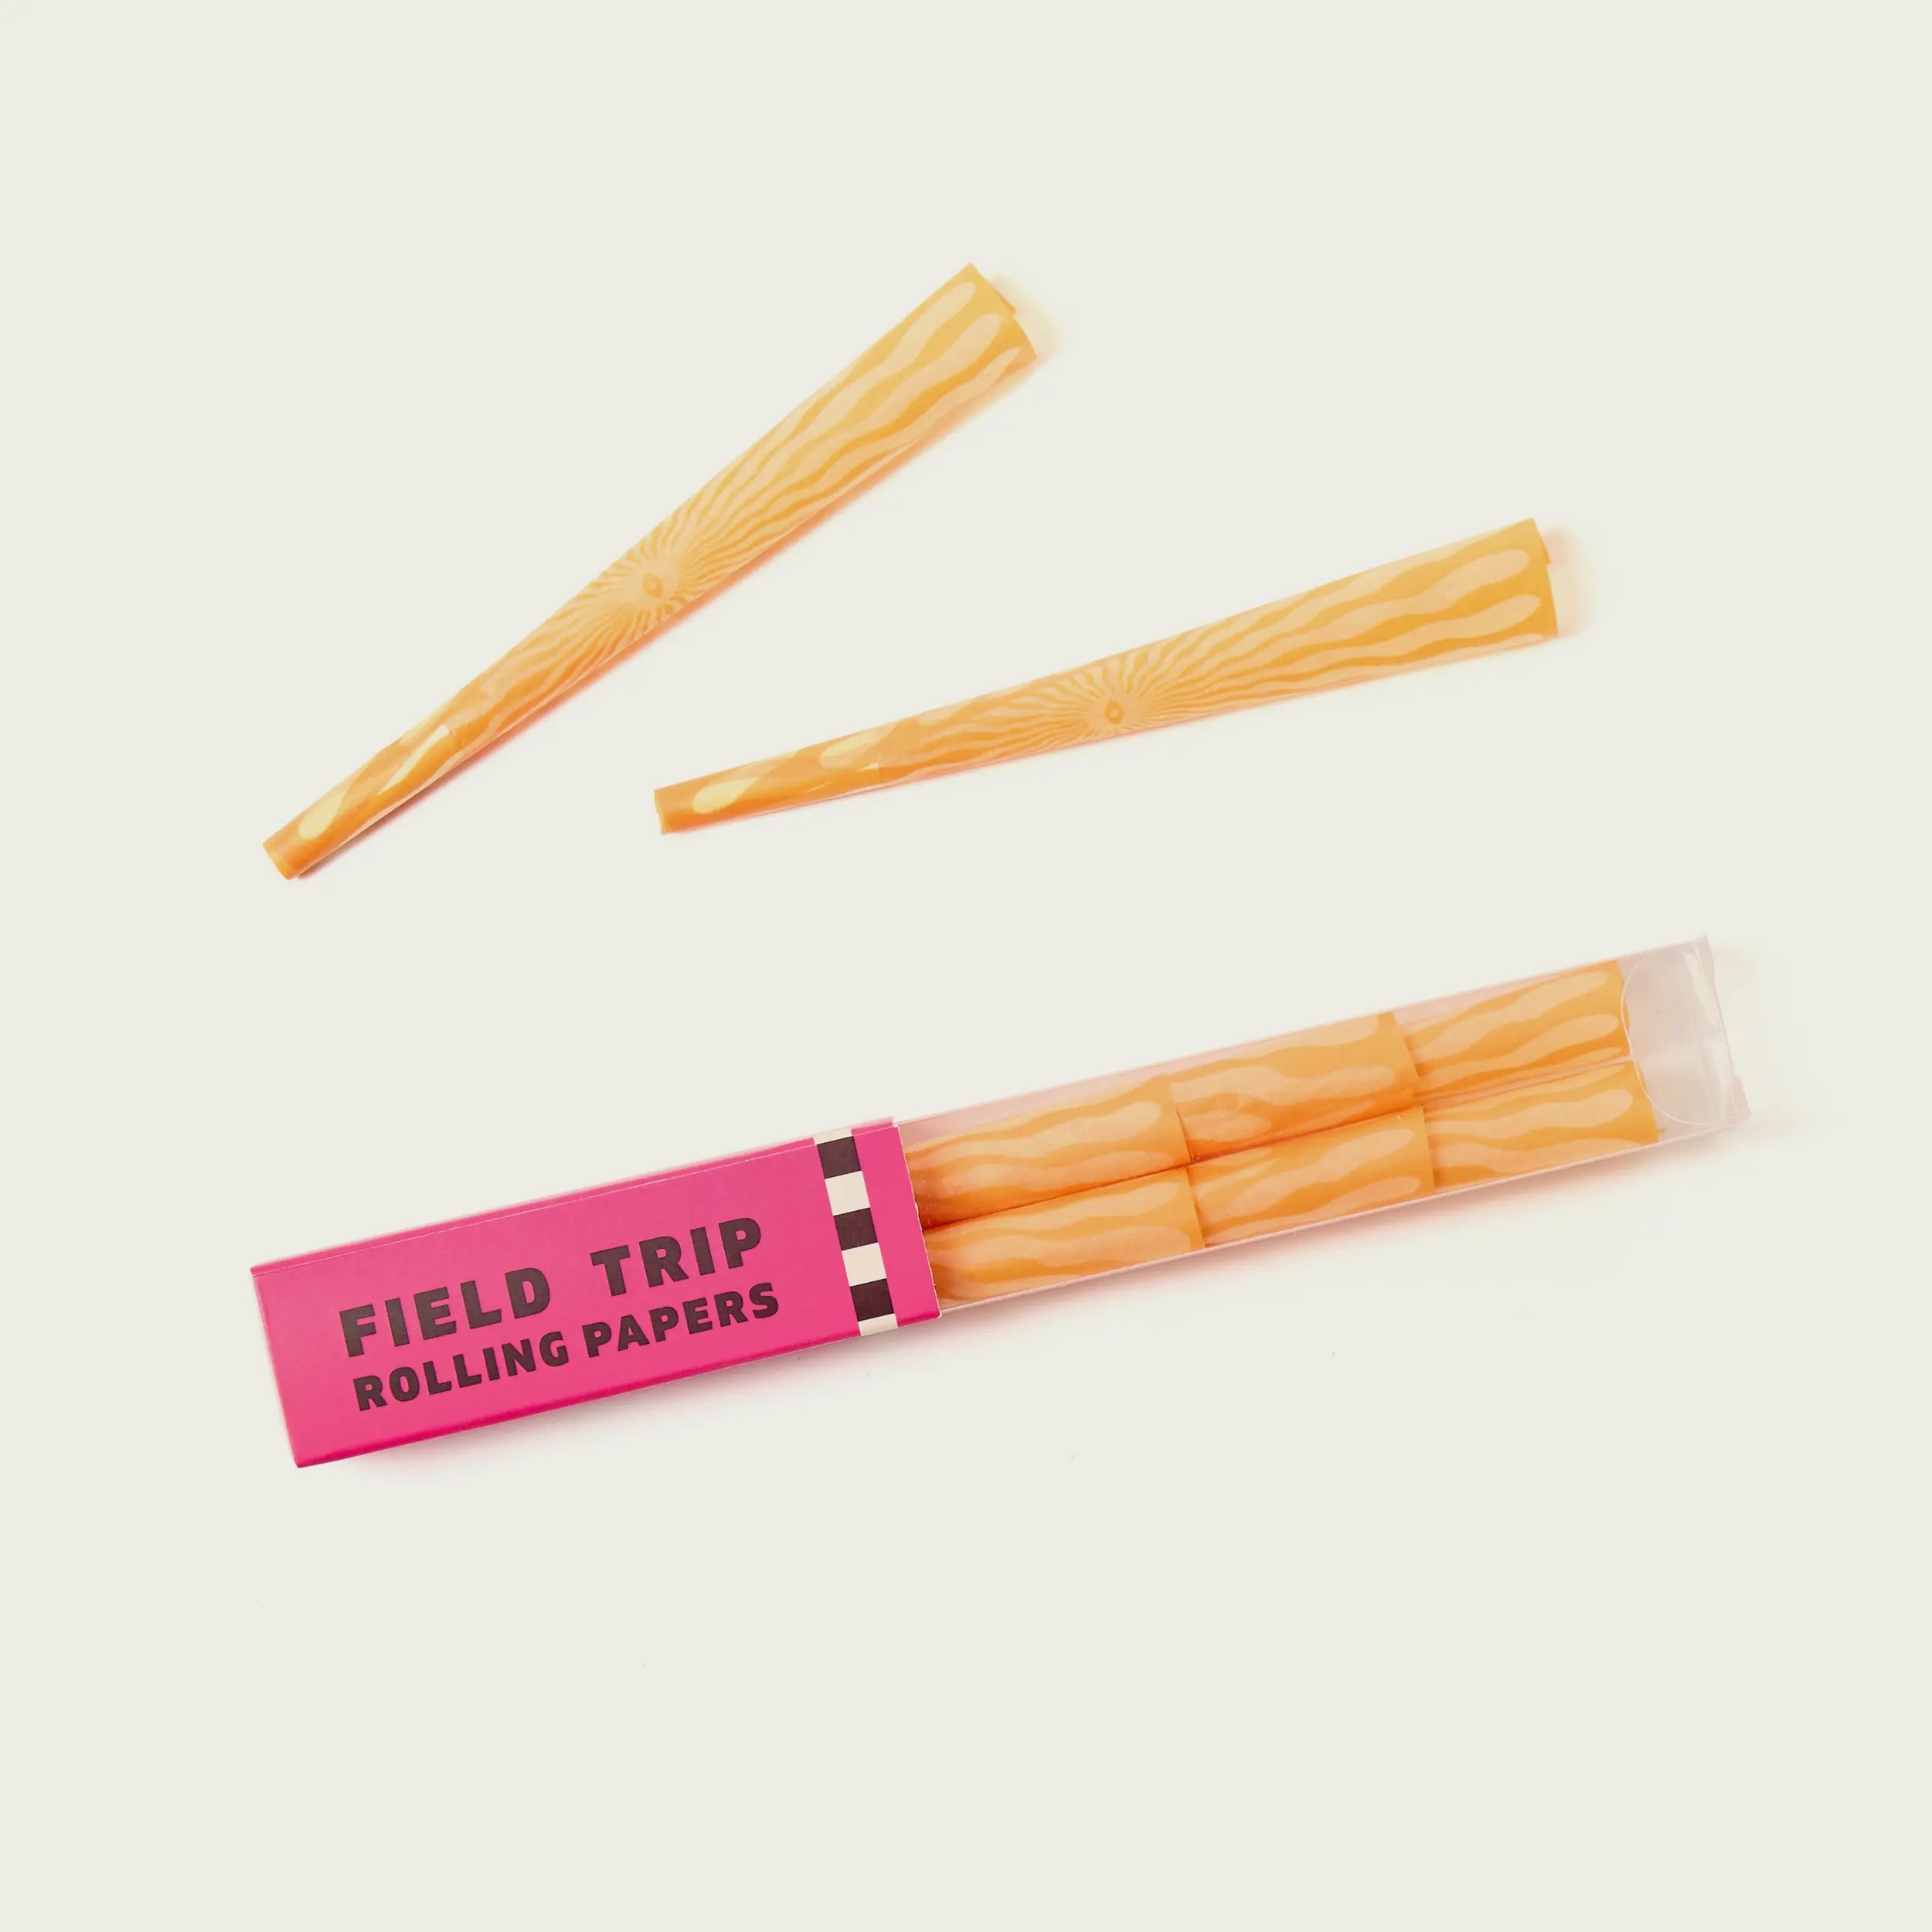 A 6-pack of Field Trip rolling paper cones, each in vibrant sunny colorways, ready for pre-roll enjoyment.